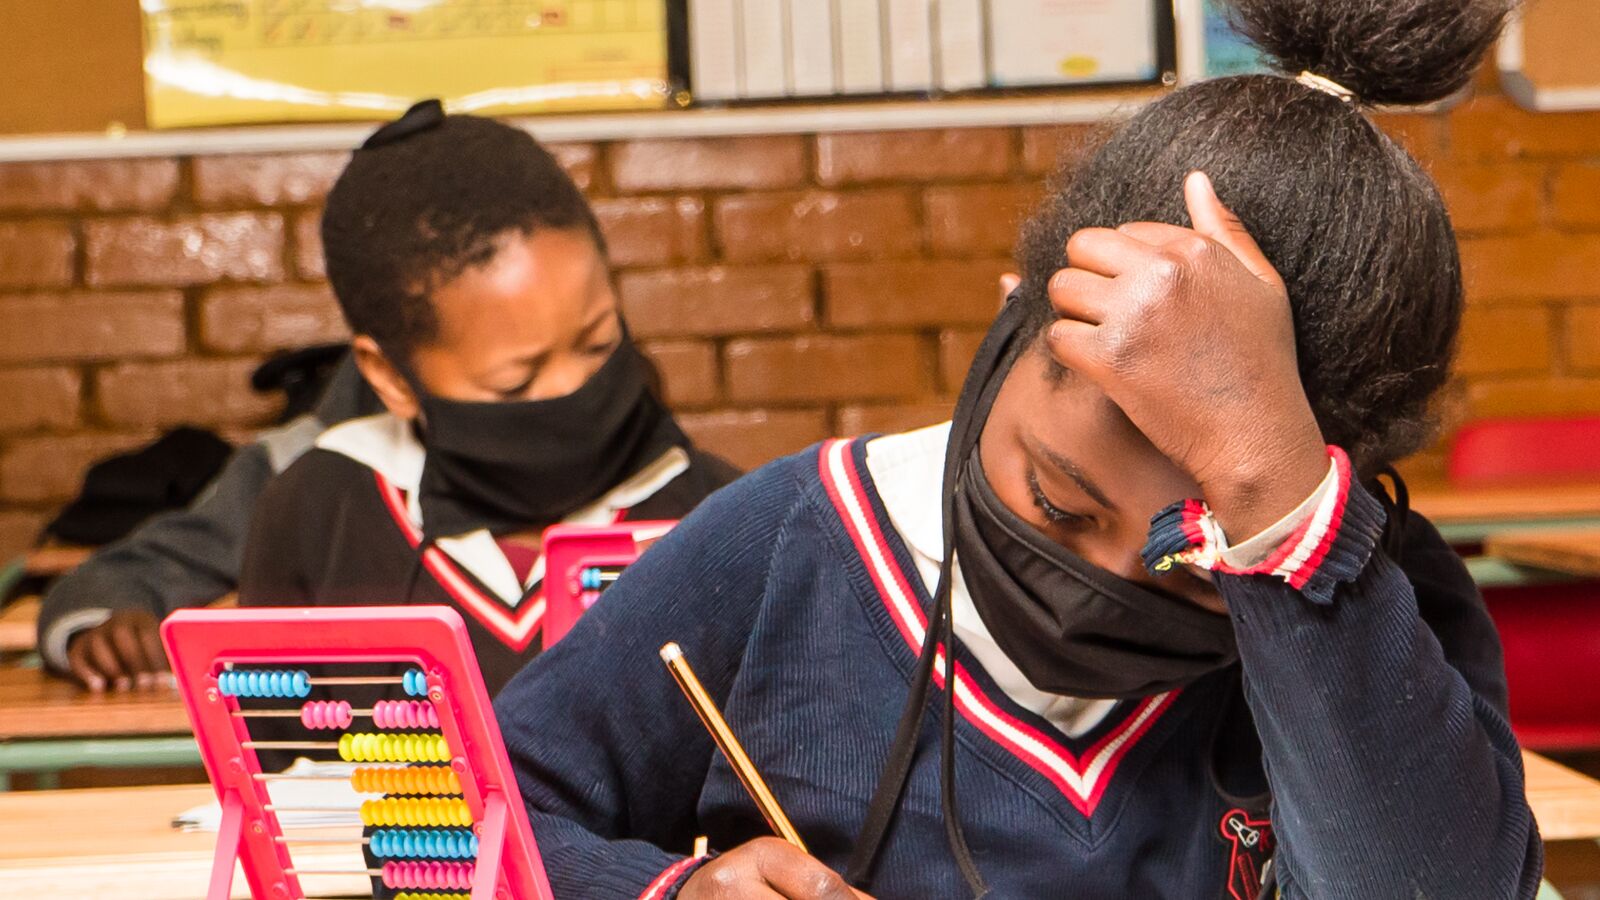 A JumpStart intern helps a student in a South African classroom.